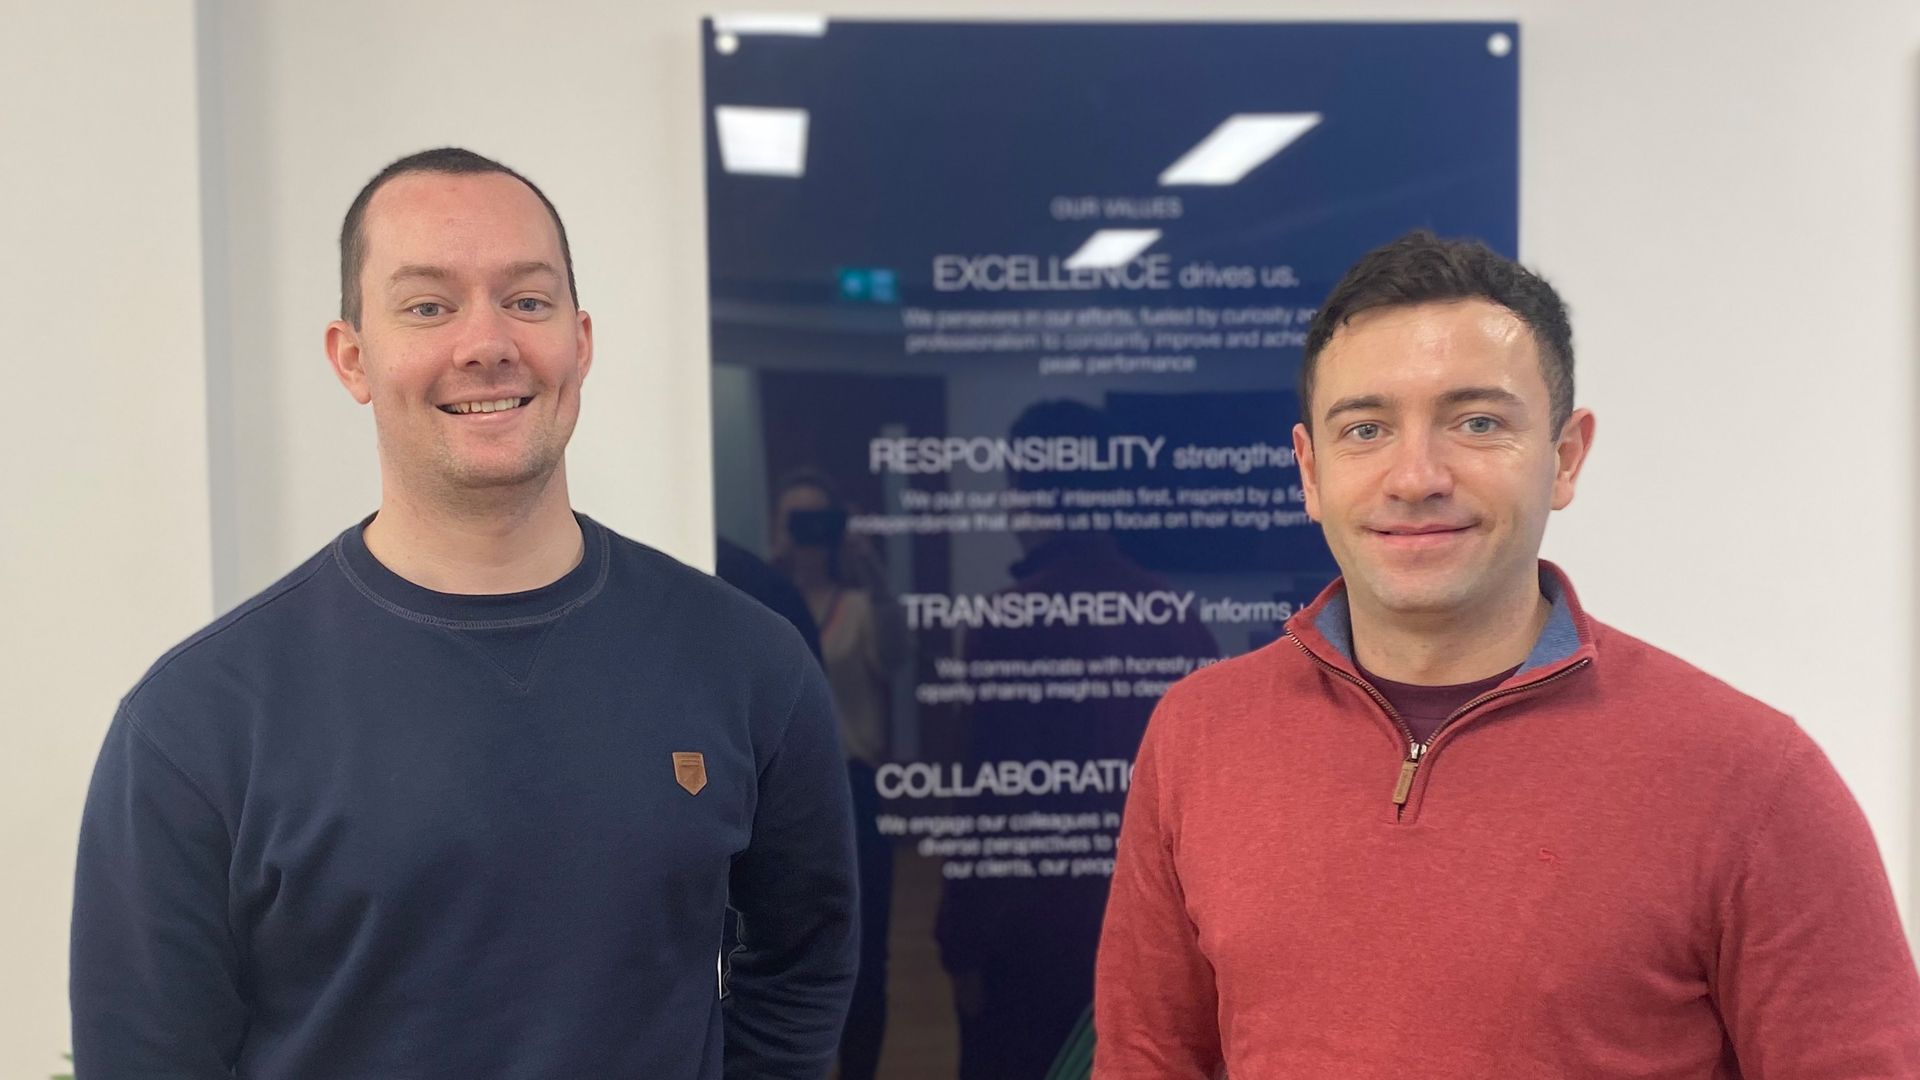 Two male colleagues post for a photo in front a poster displaying the company's values, including excellence, responsibility, transparency, and collaboration